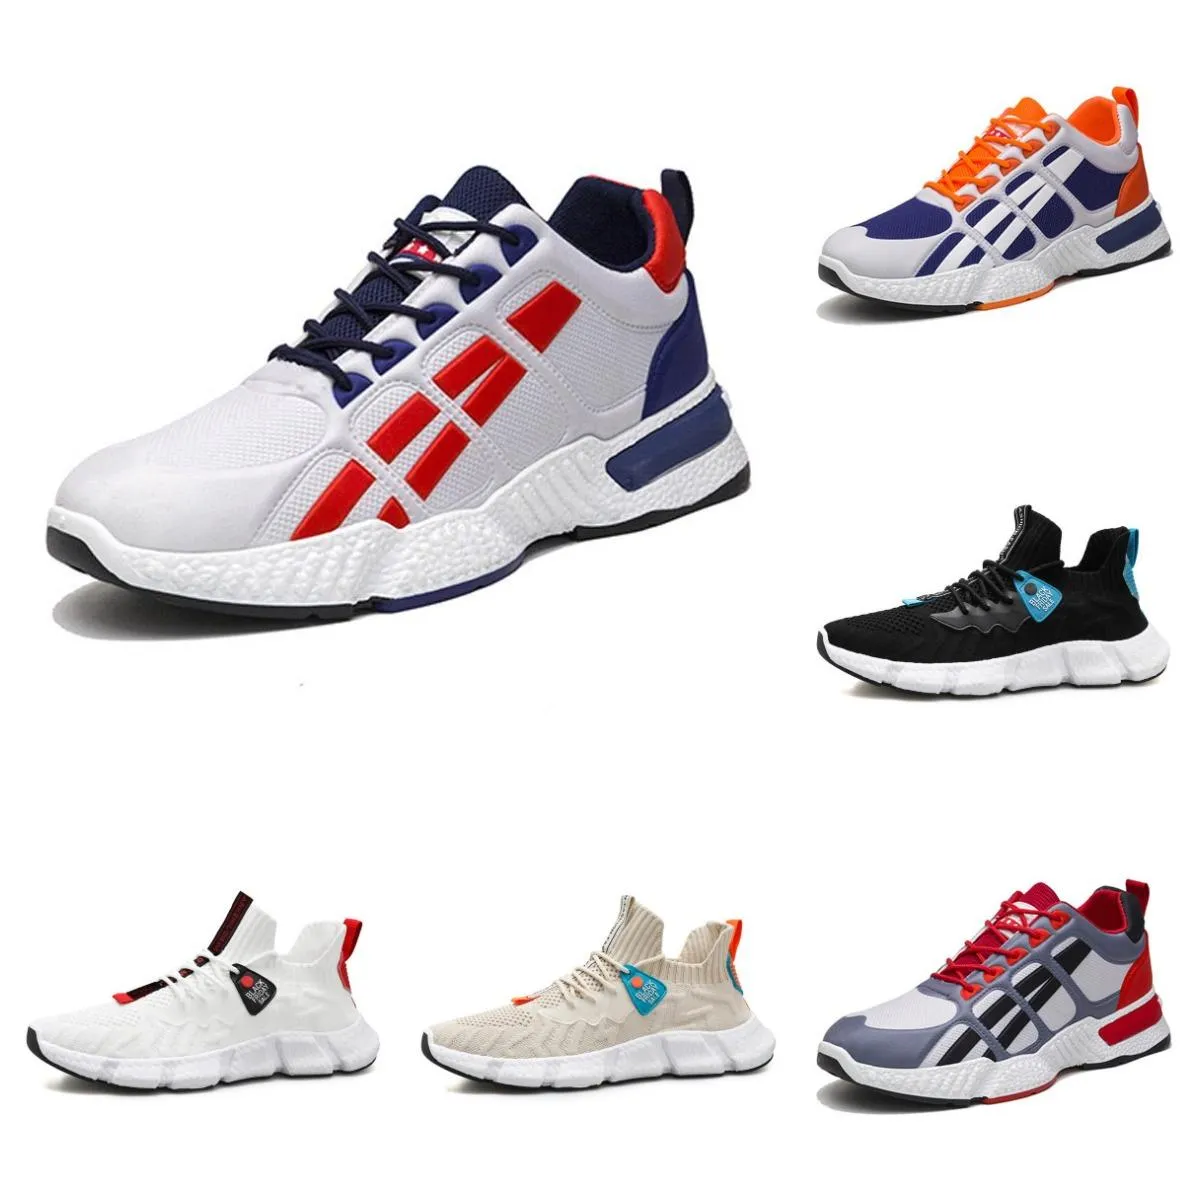 Designer Luxury Running Shoes for trainers men womens shoe casual shoes lace-up round toe embroidery